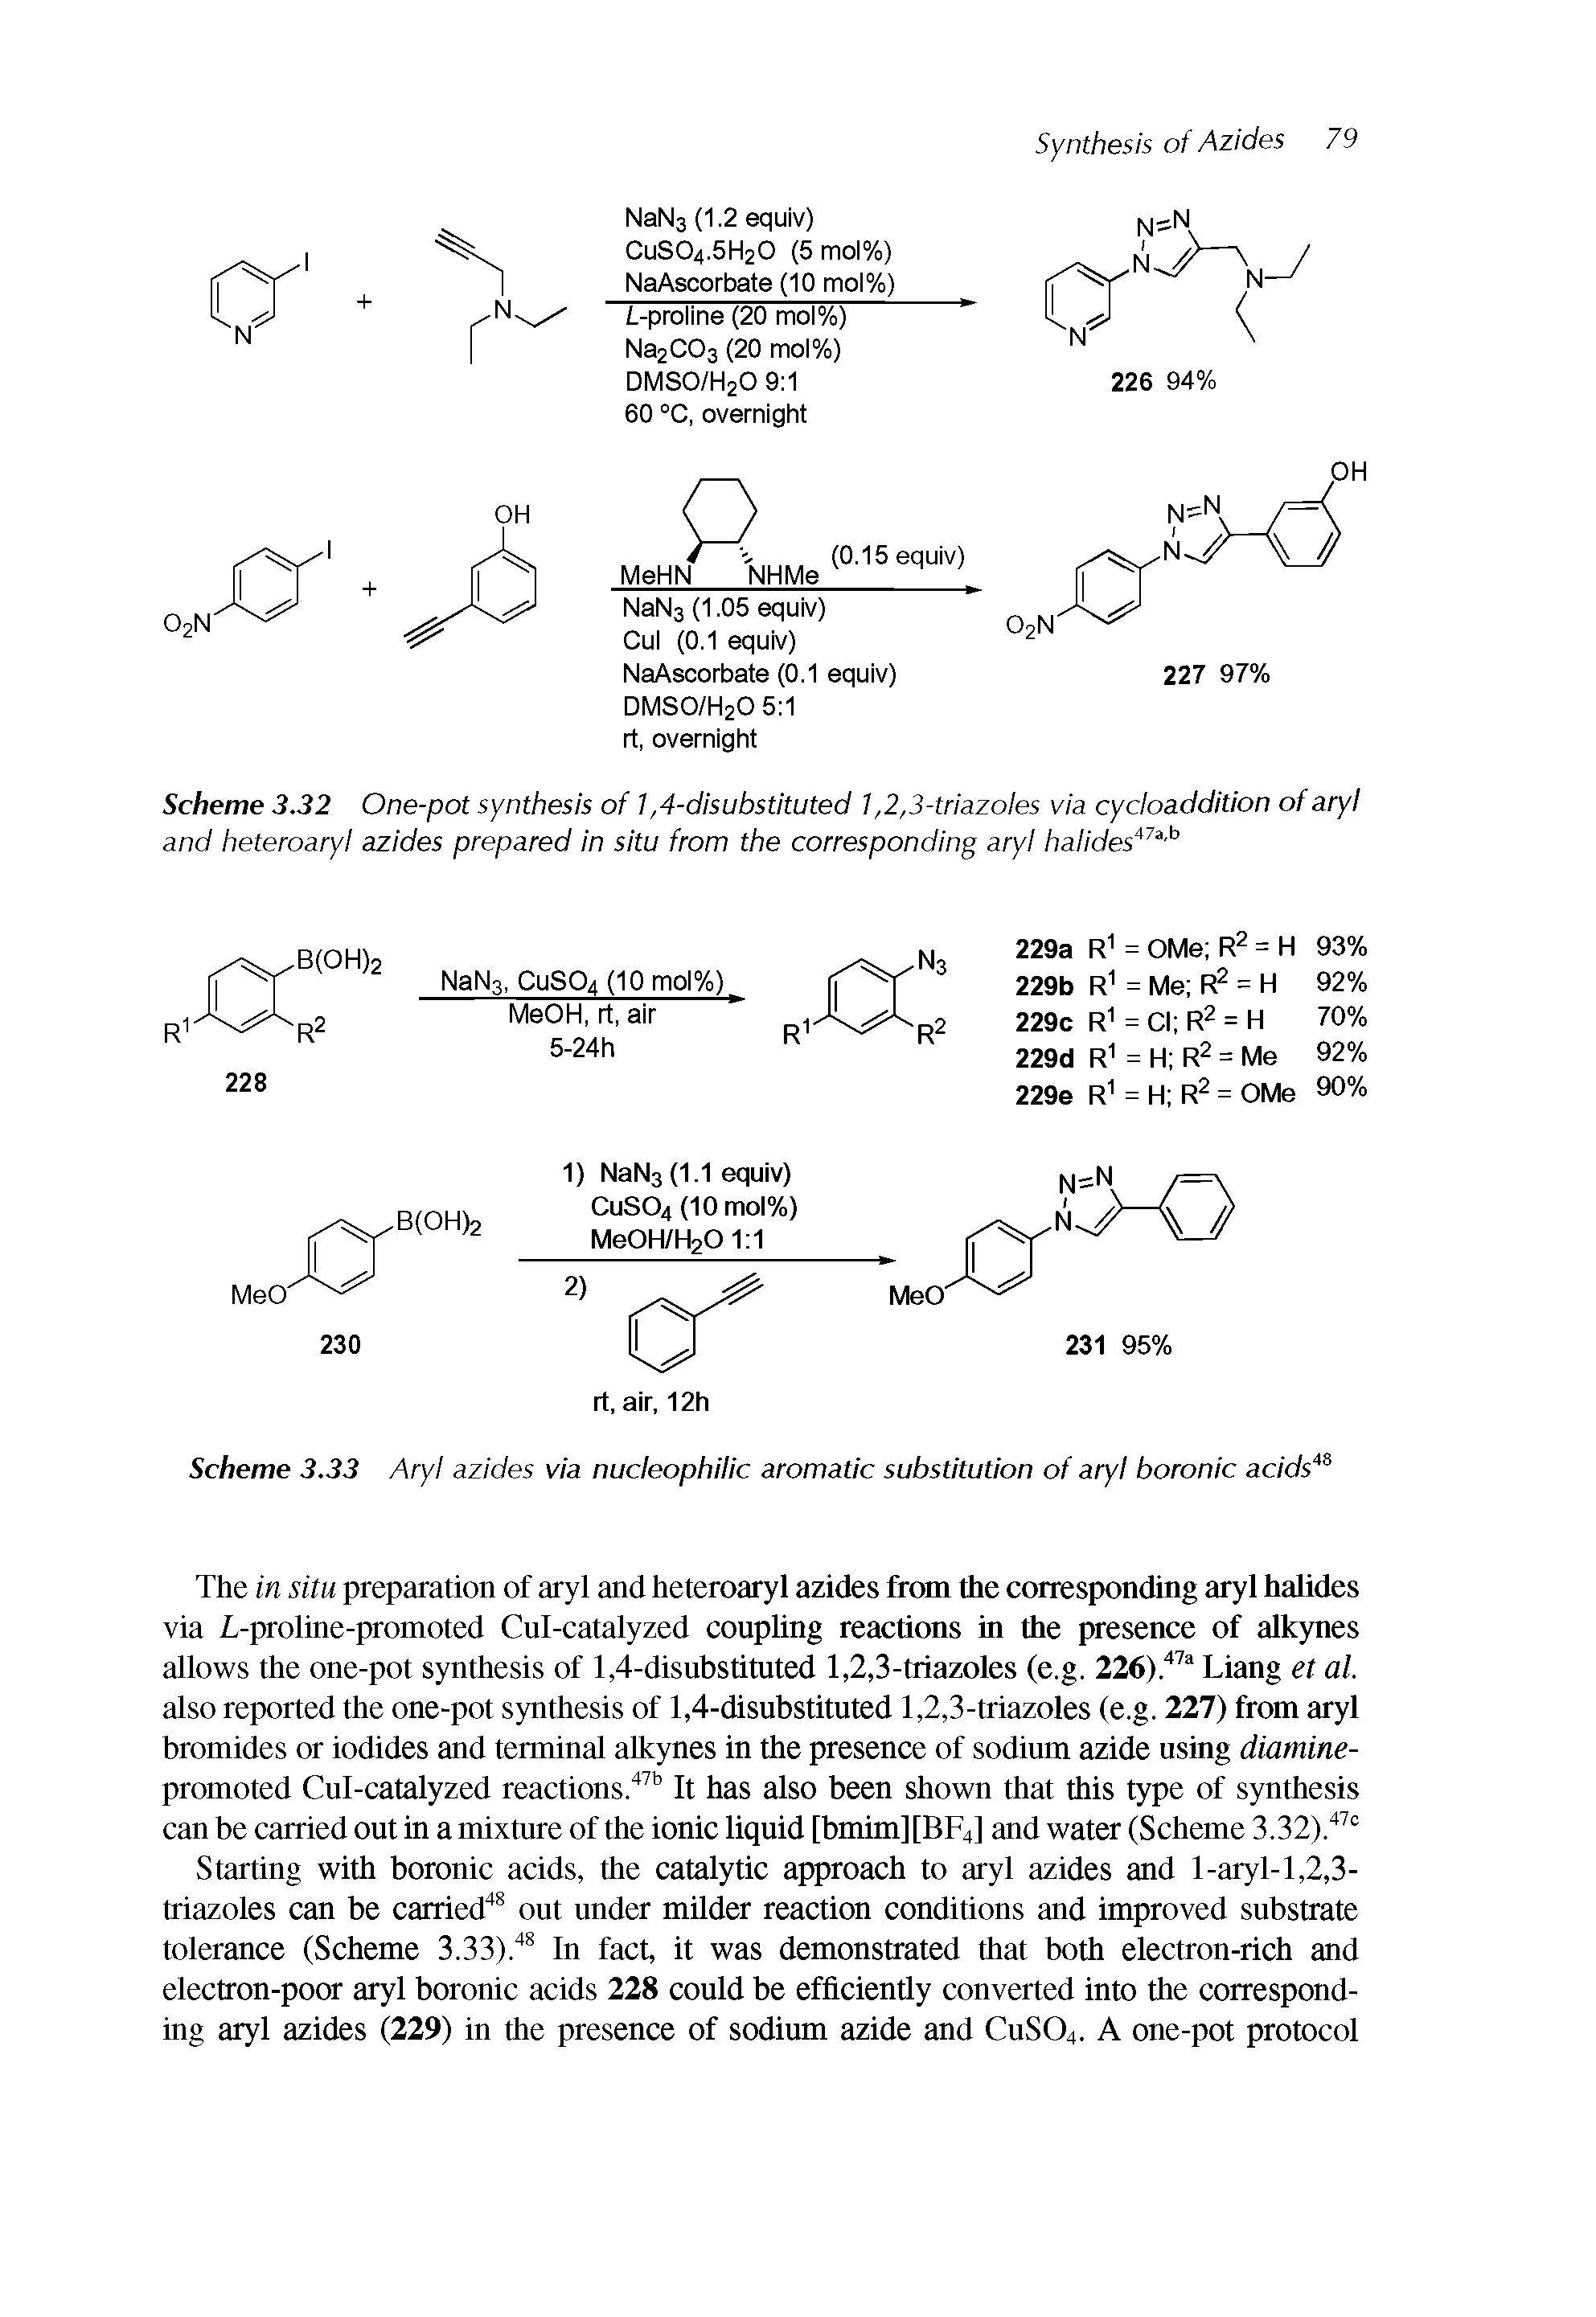 Scheme 3.32 One-pot synthesis of i, 4-disubstituted i, 2,3-triazoles via cycloaddition of aryl and heteroaryl azides prepared in situ from the corresponding aryl halides ...